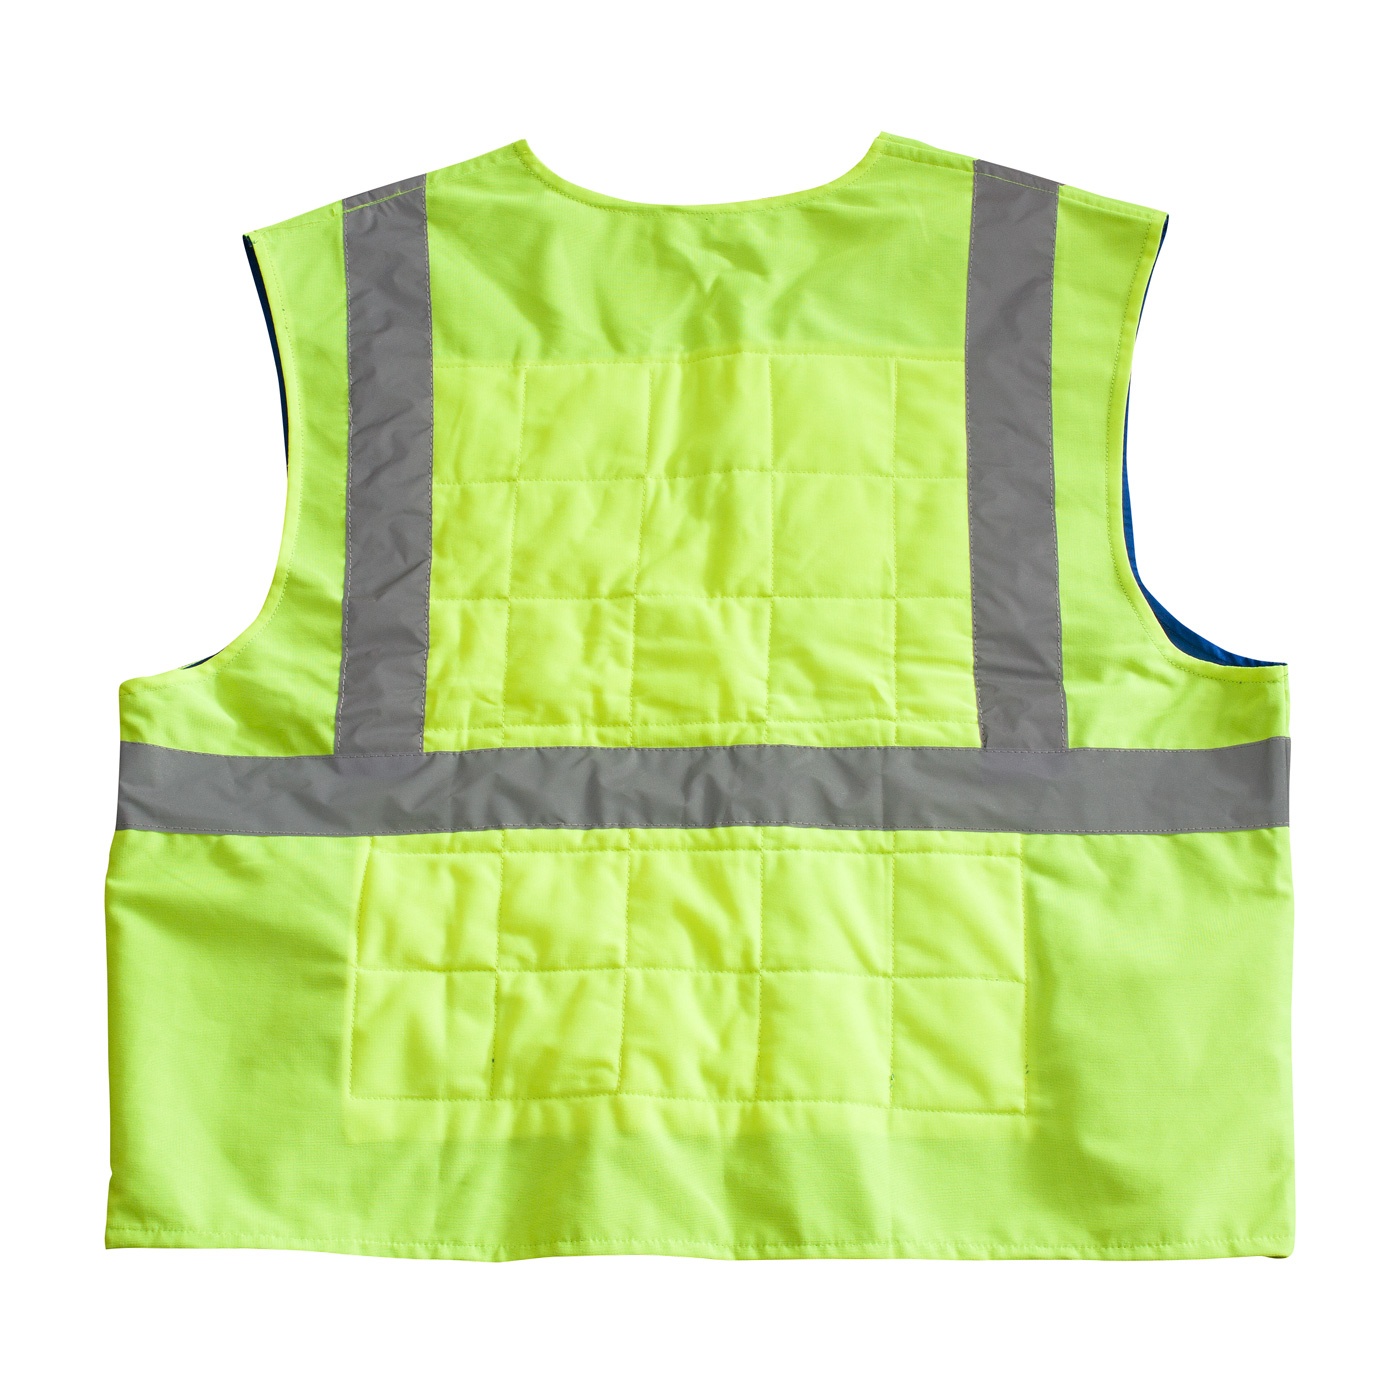 PIP EZ-Cool Class 2 Flash Evaporative Cooling Vest from Columbia Safety